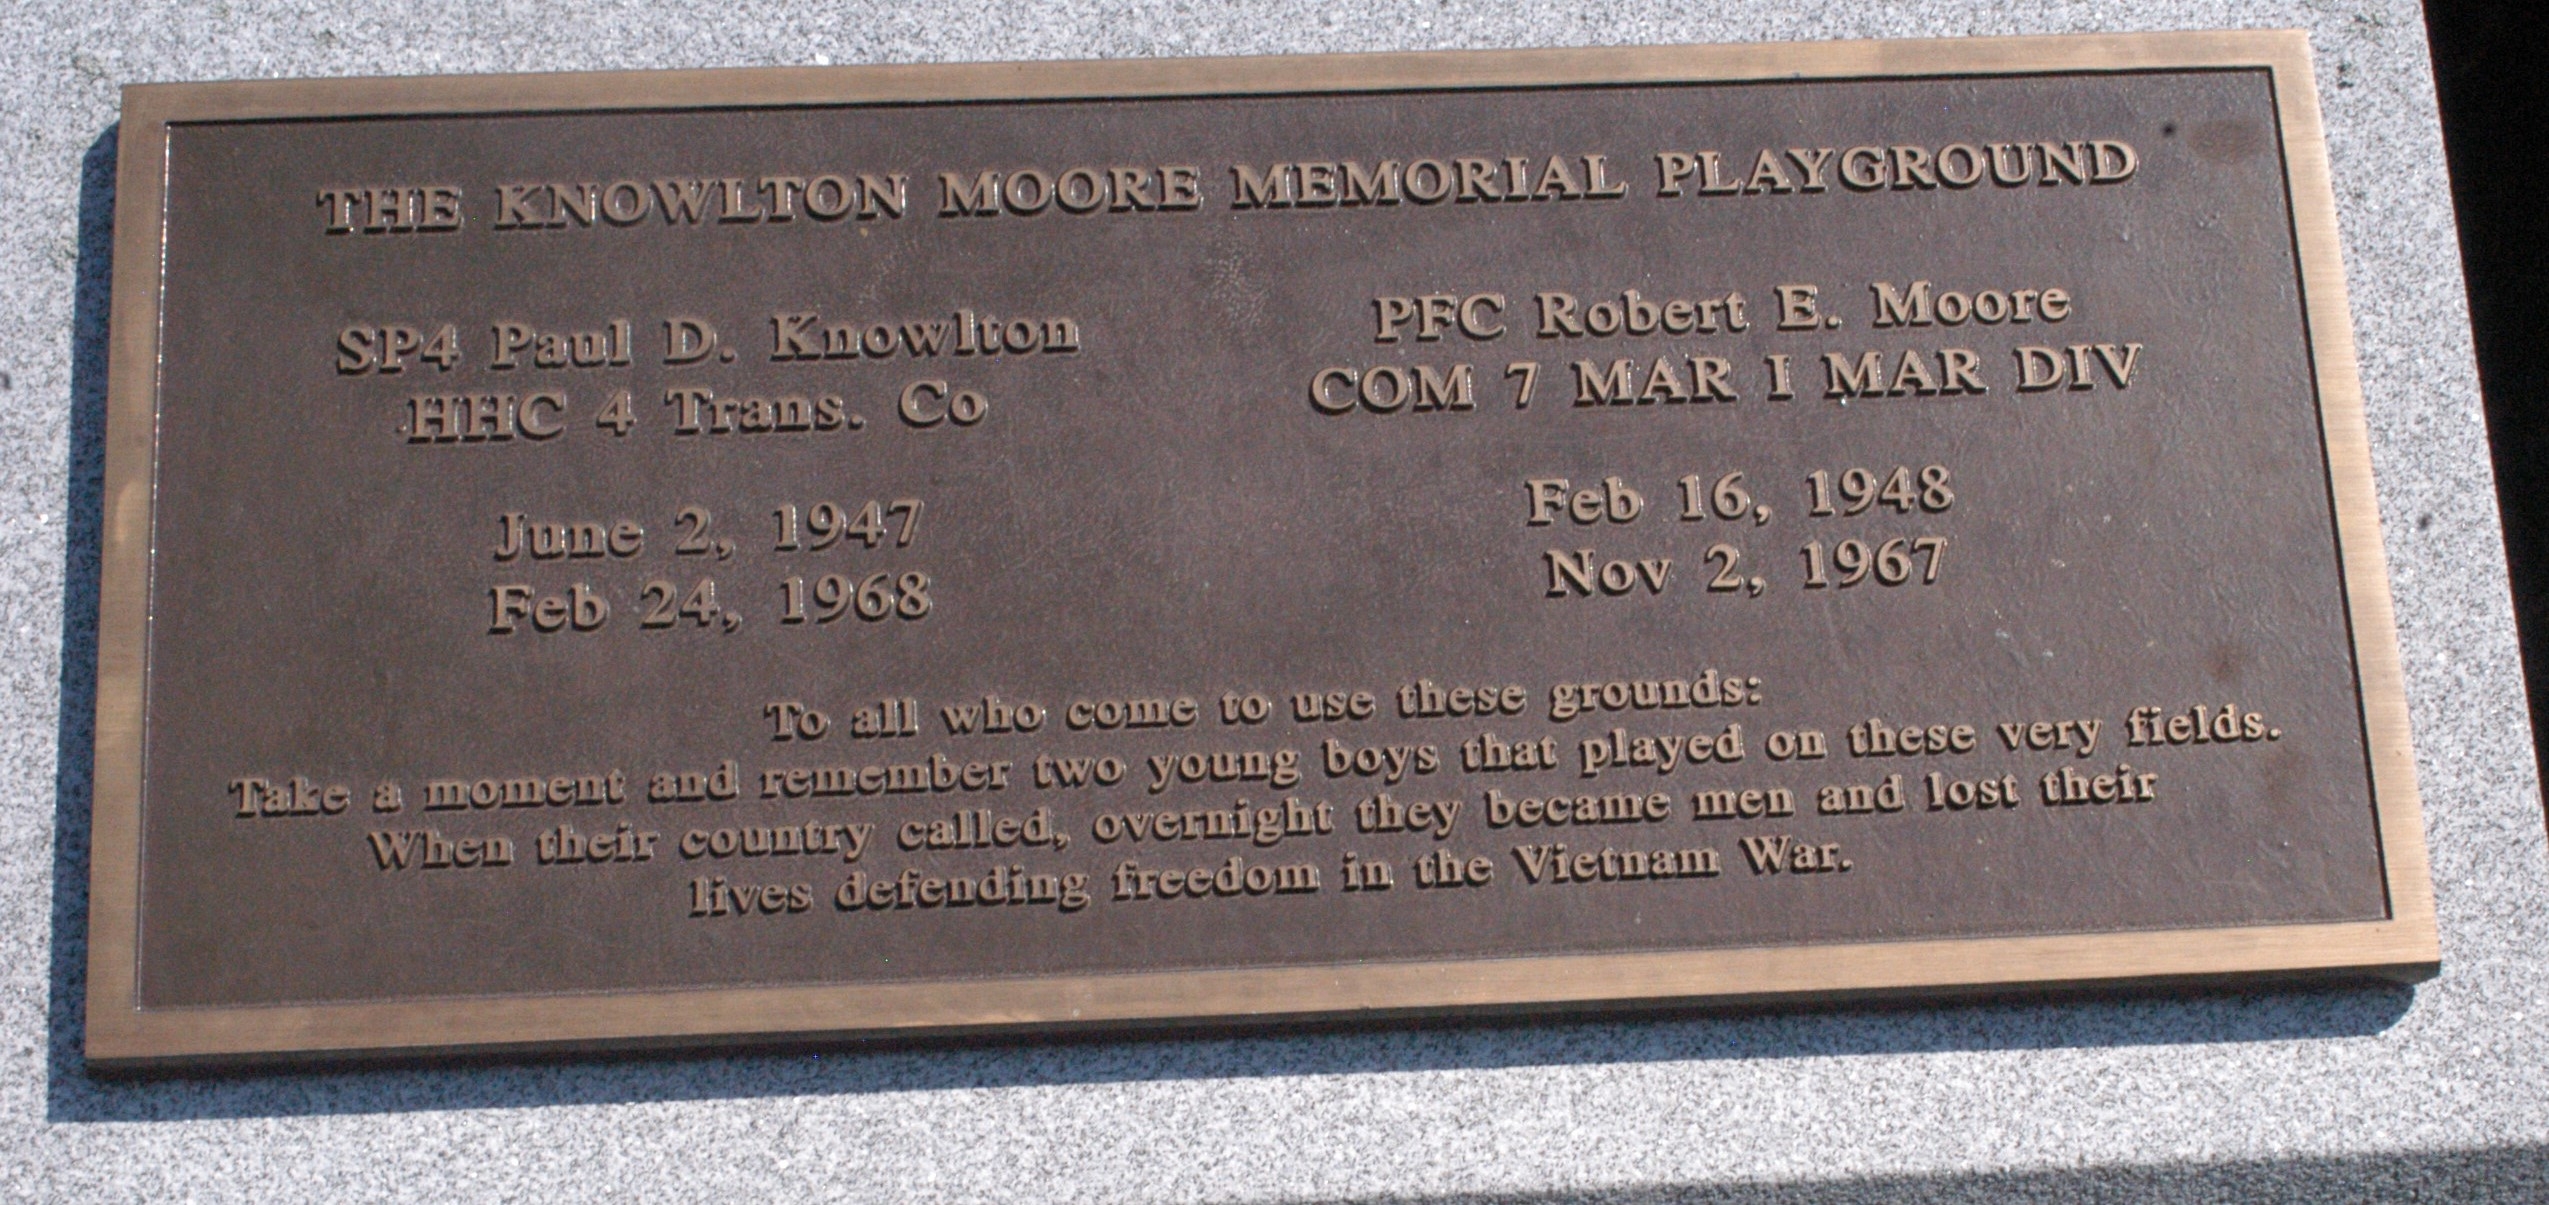 Knowlton Moore Memorial Playground Marker